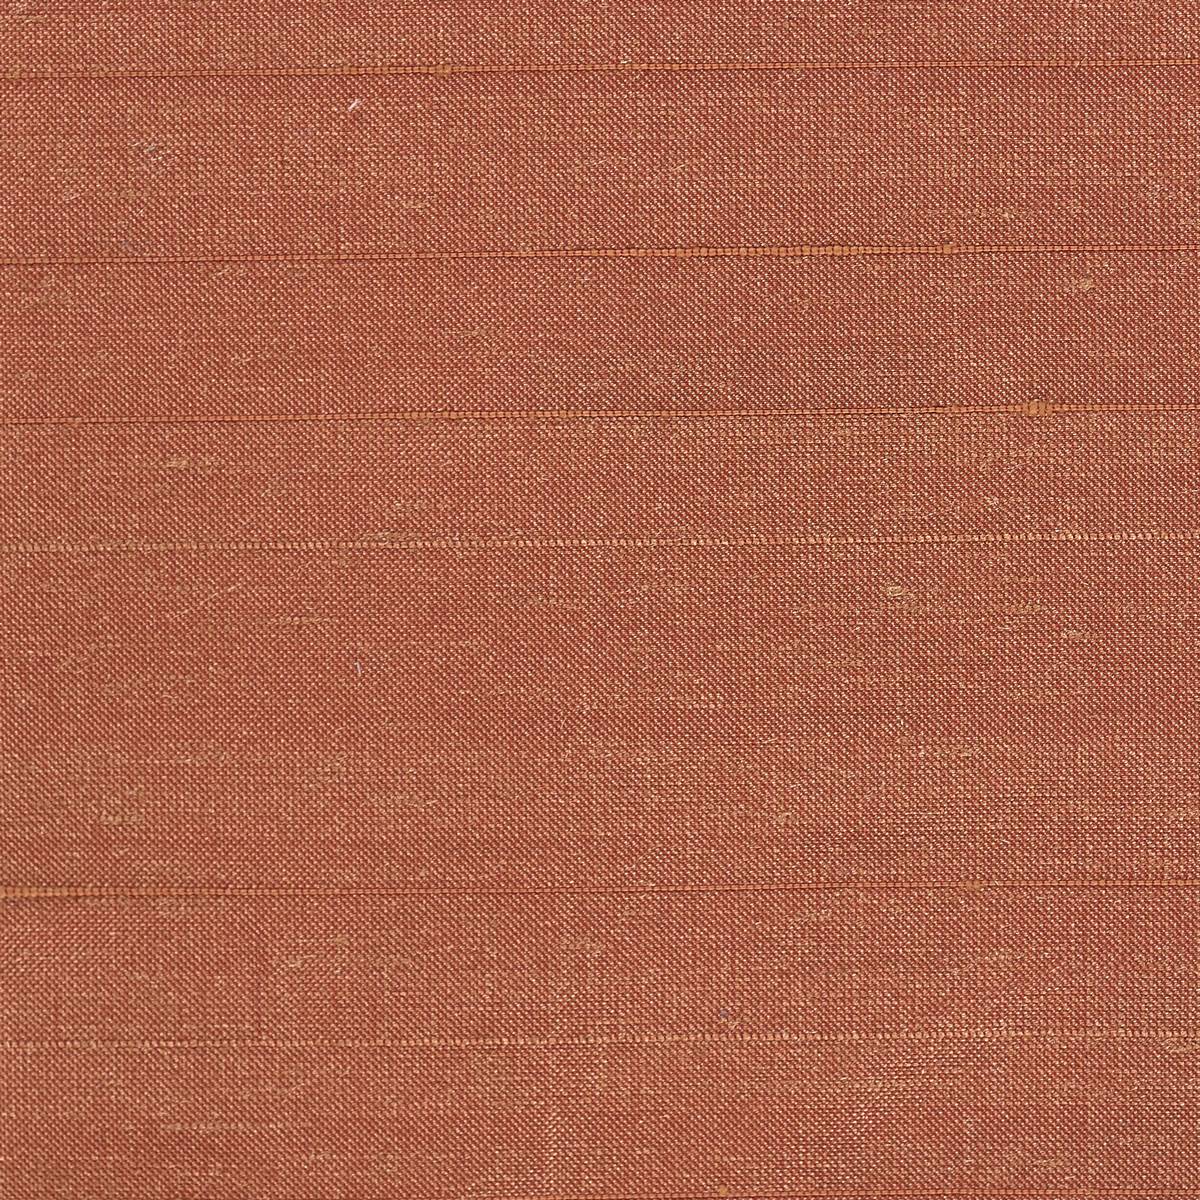 Deflect Copper Fabric by Harlequin